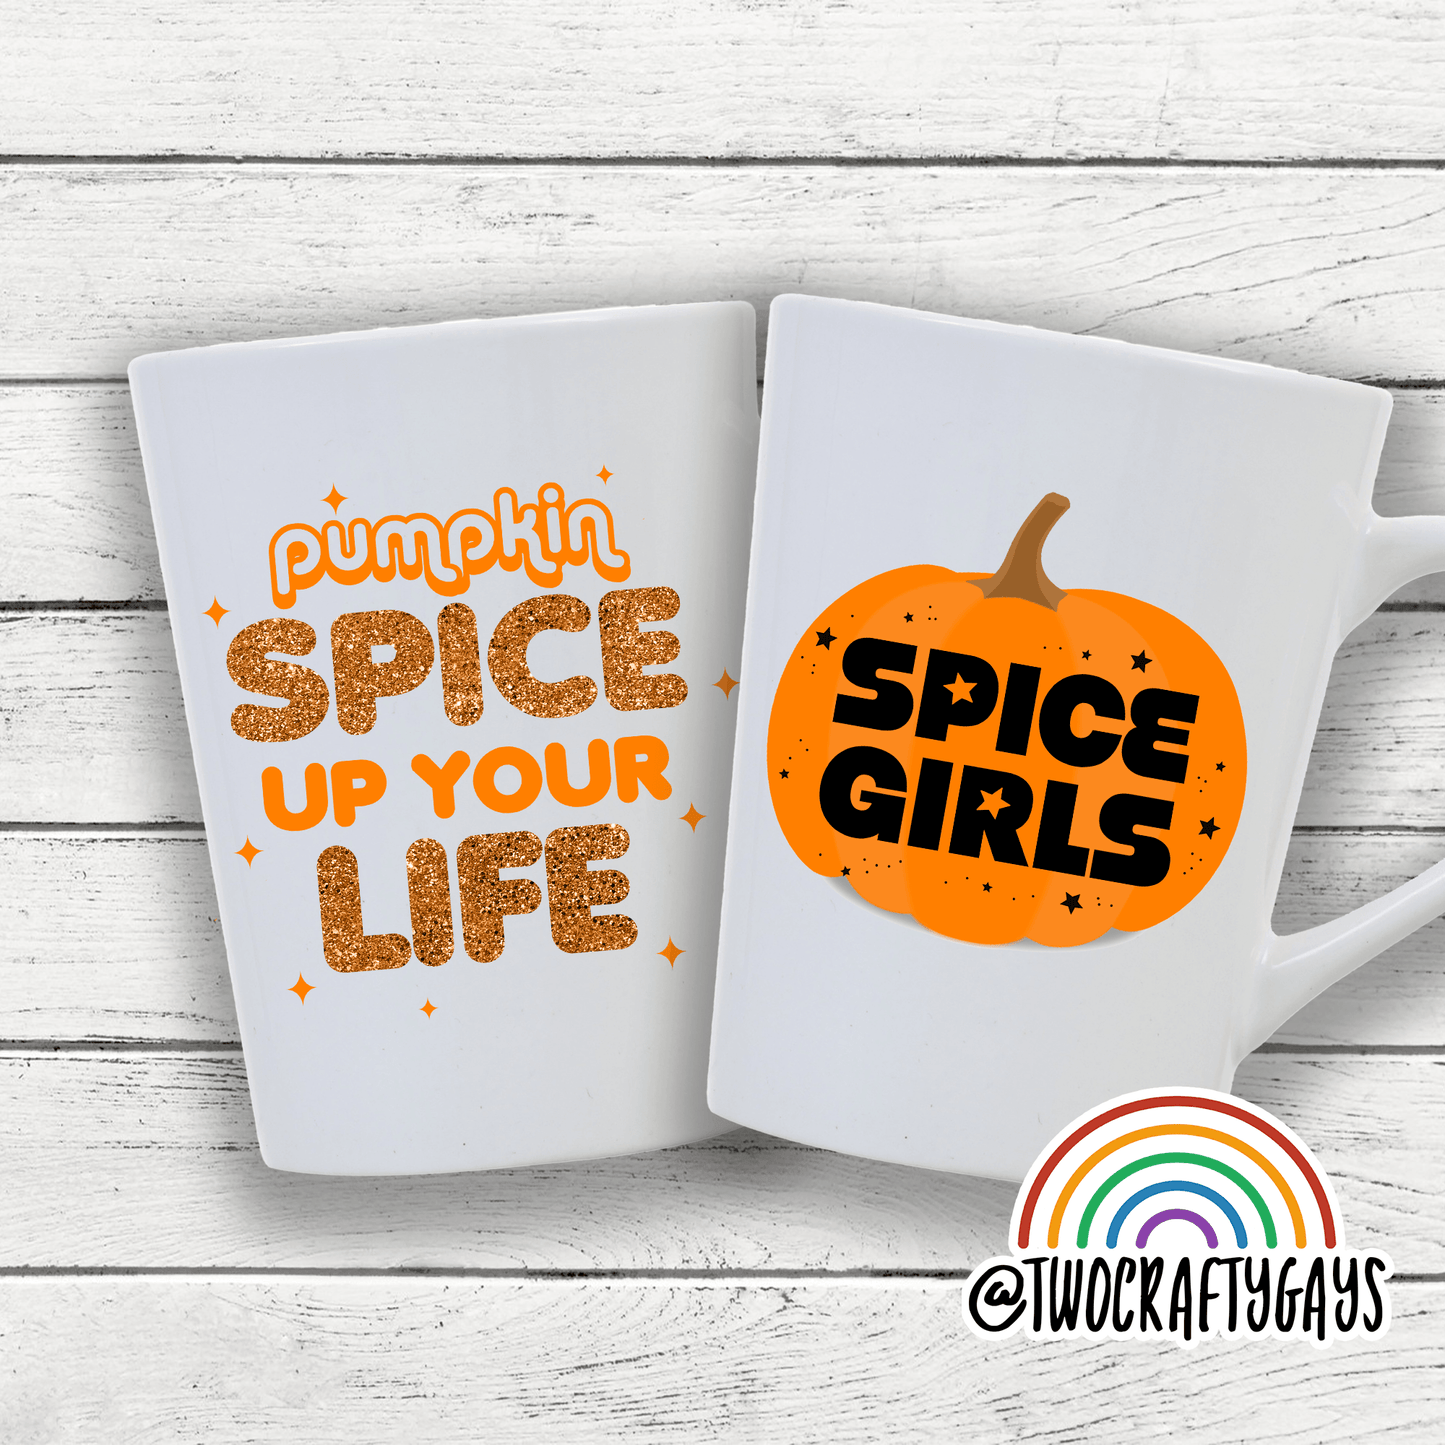 Spice Girls "Spice Up Your Life" Coffee Mug - Two Crafty Gays